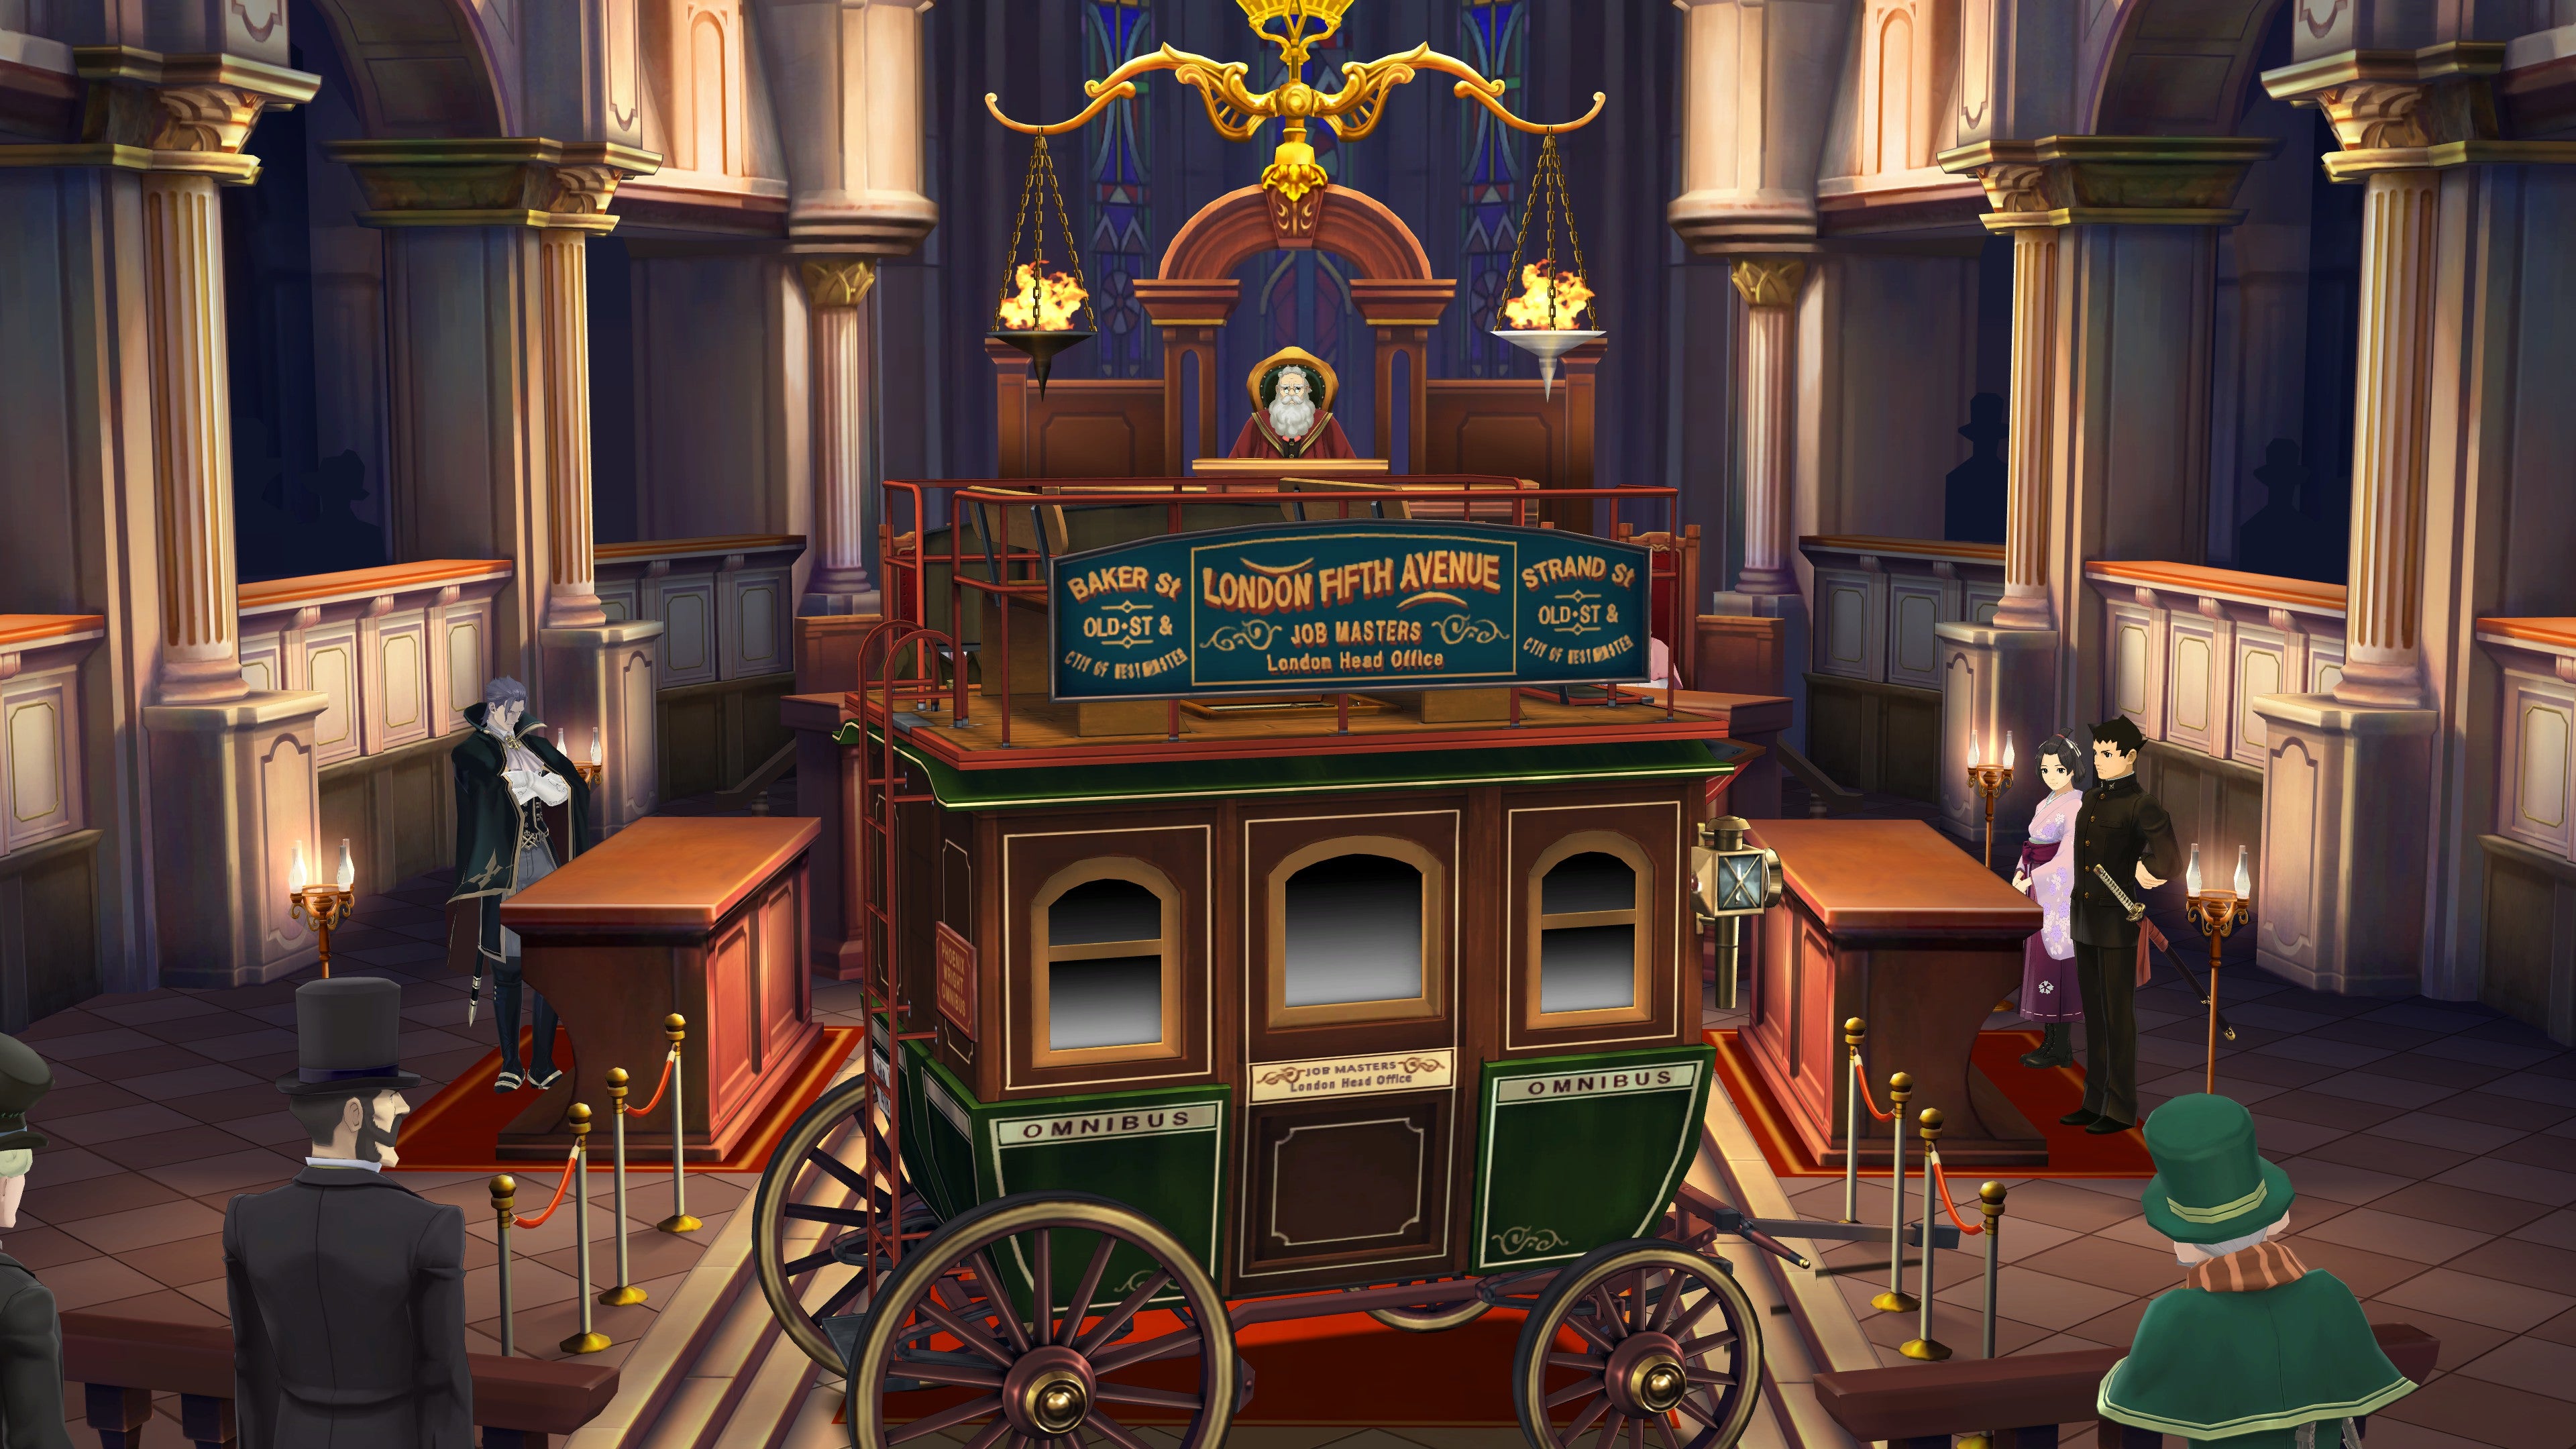 A Victorian hansom cab has been brought into court in The Great Ace Attorney Chronicles